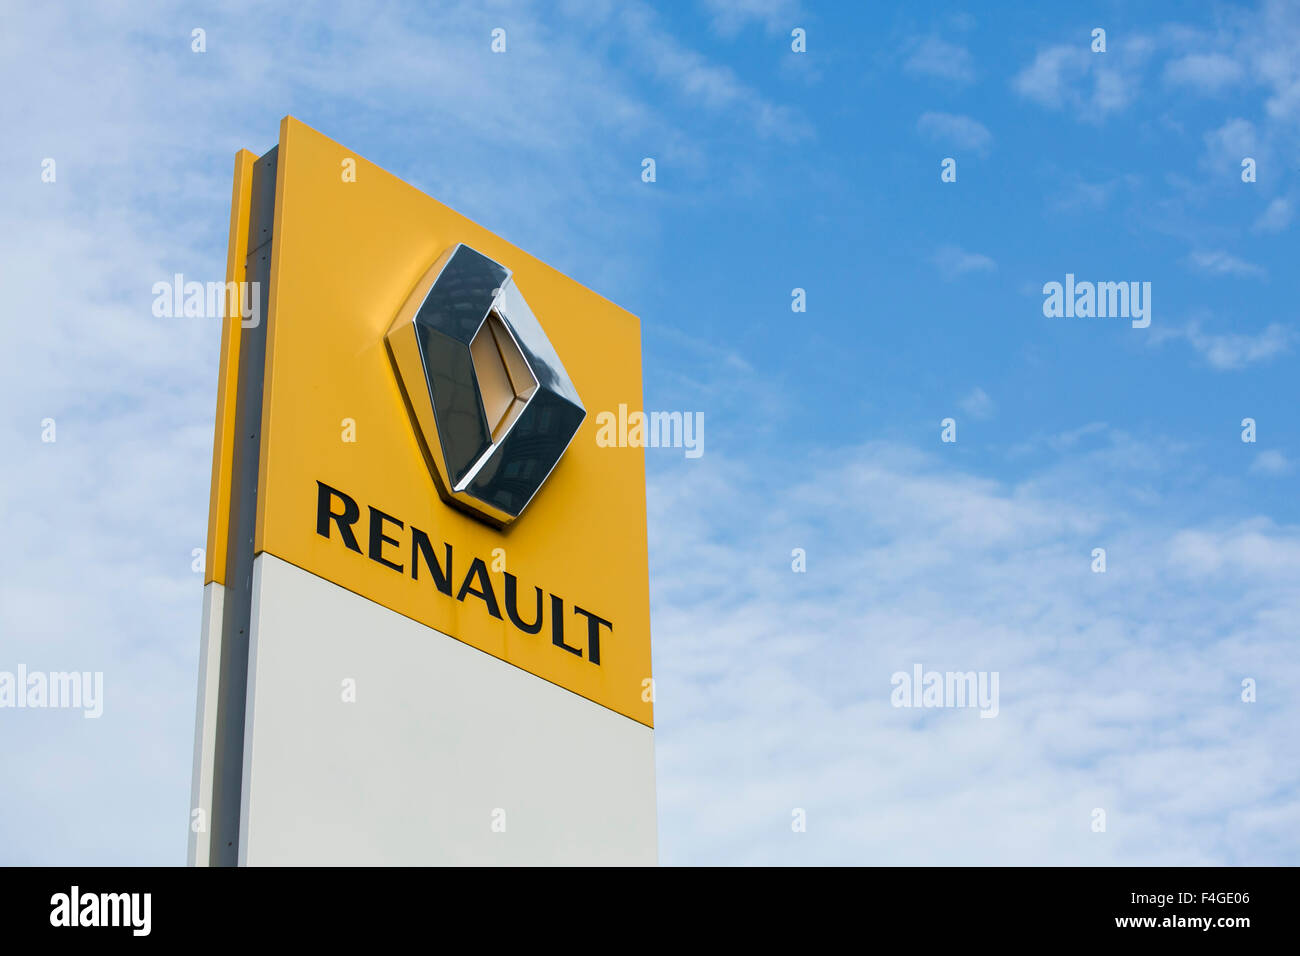 A logo sign outside of an Renault vehicle dealership in Amsterdam, Netherlands on October 3, 2015. Stock Photo